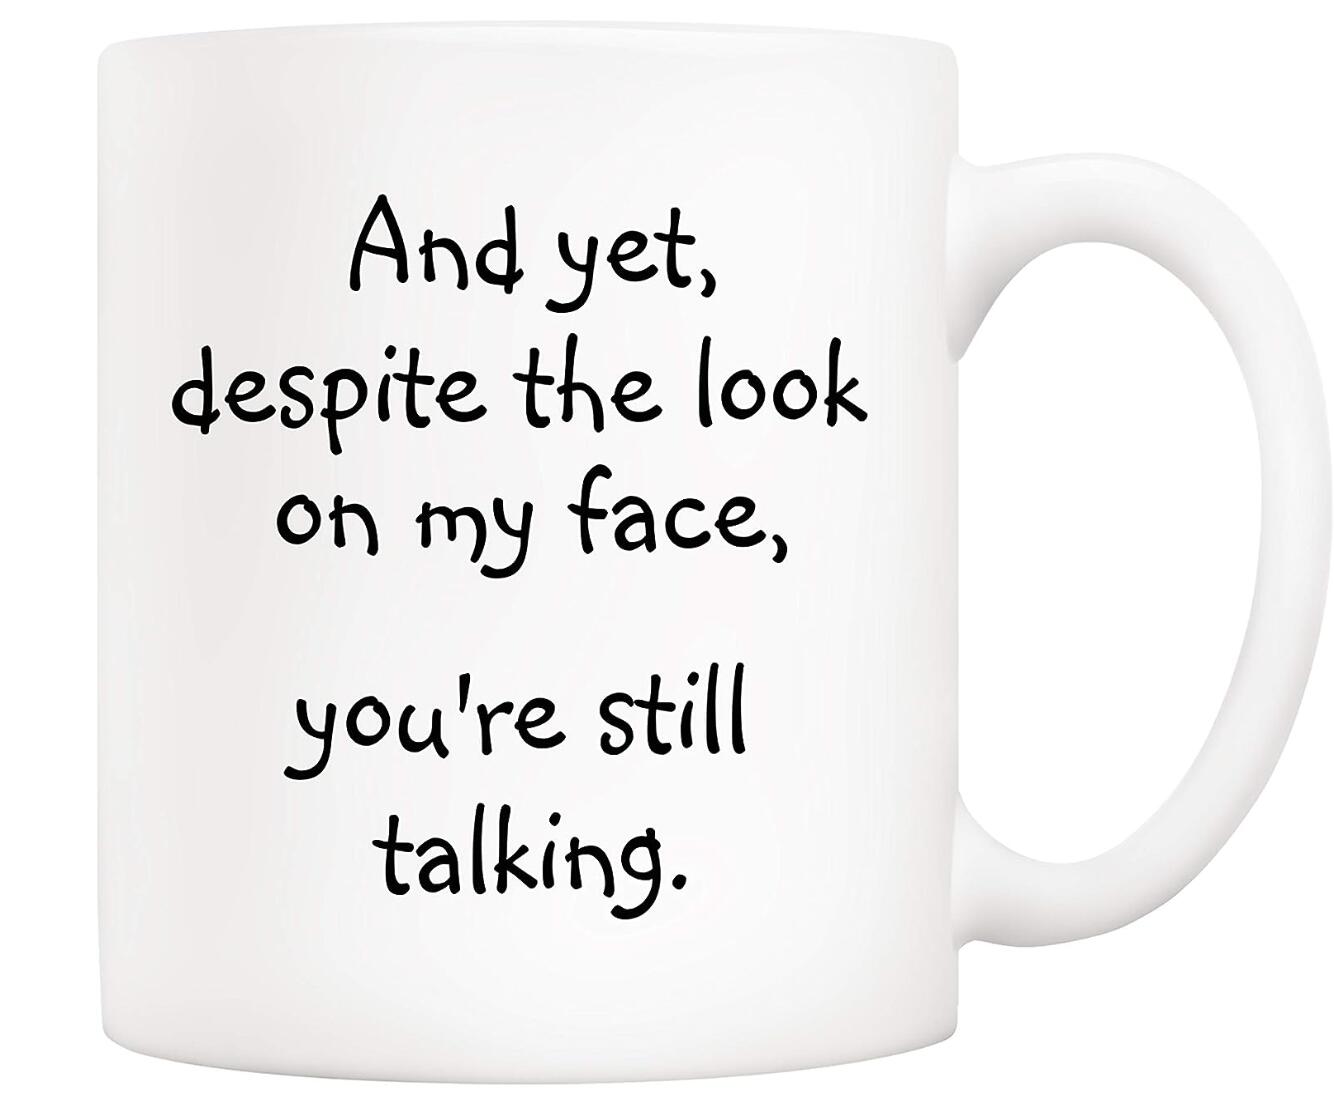 And Yet Despite the Look on My Face You're Still Talking Coffee Mug Friend Co-worker Birthday Gift Cup